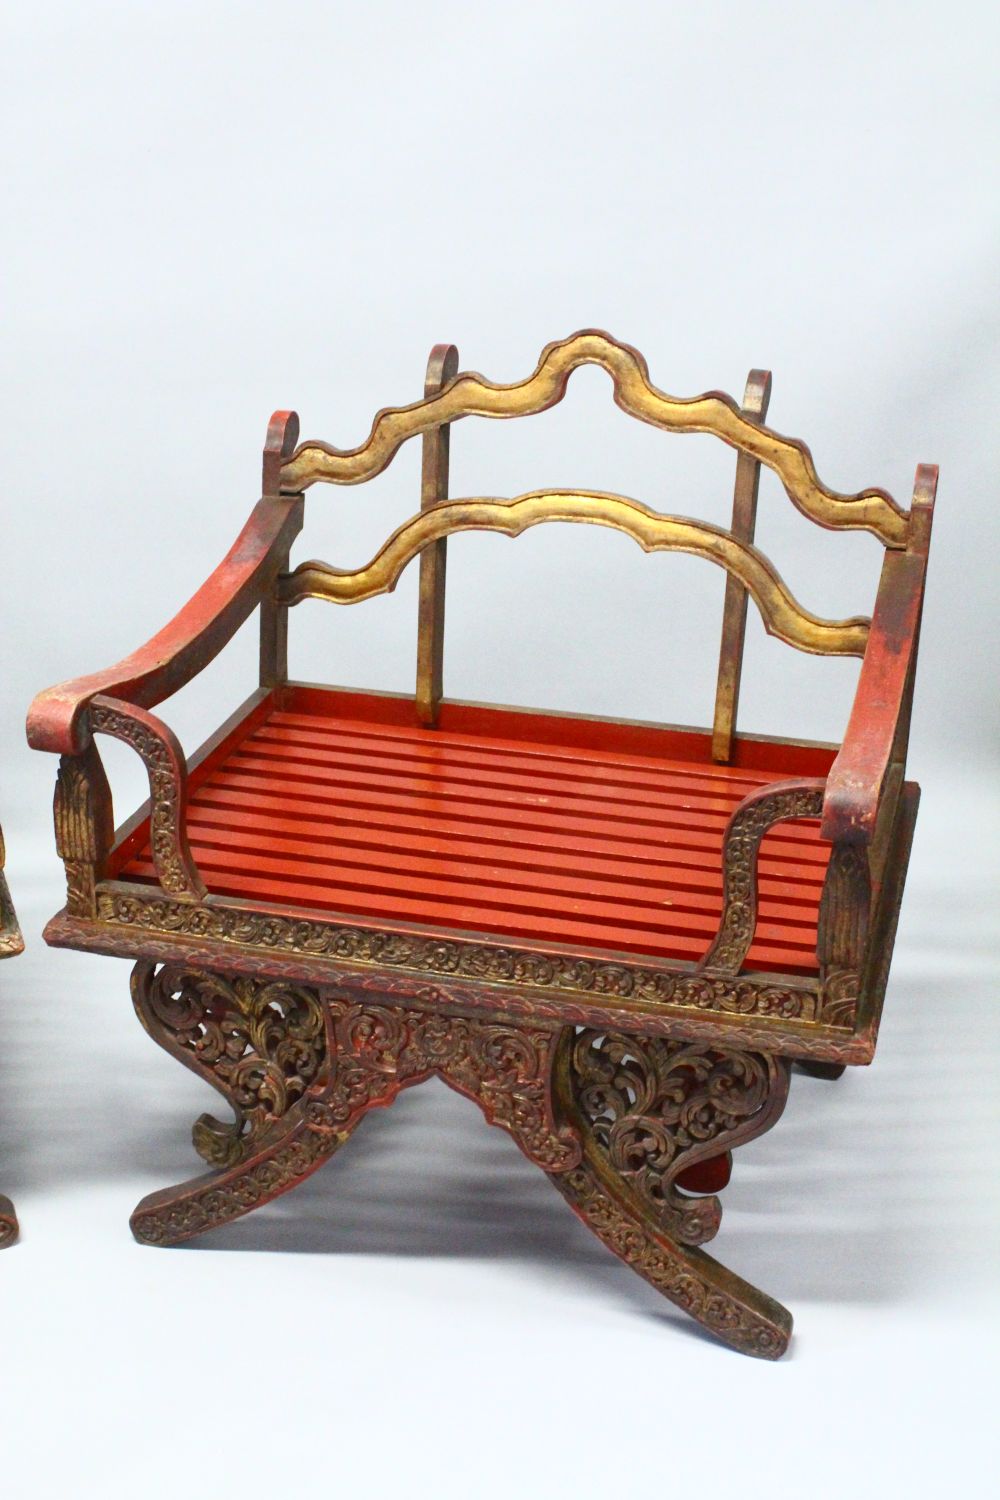 A PAIR OF 19TH/20TH CENTURY THAI CARVED HOWDAH ELEPHANT CHAIRS, profusely carved and pierced with - Image 4 of 10